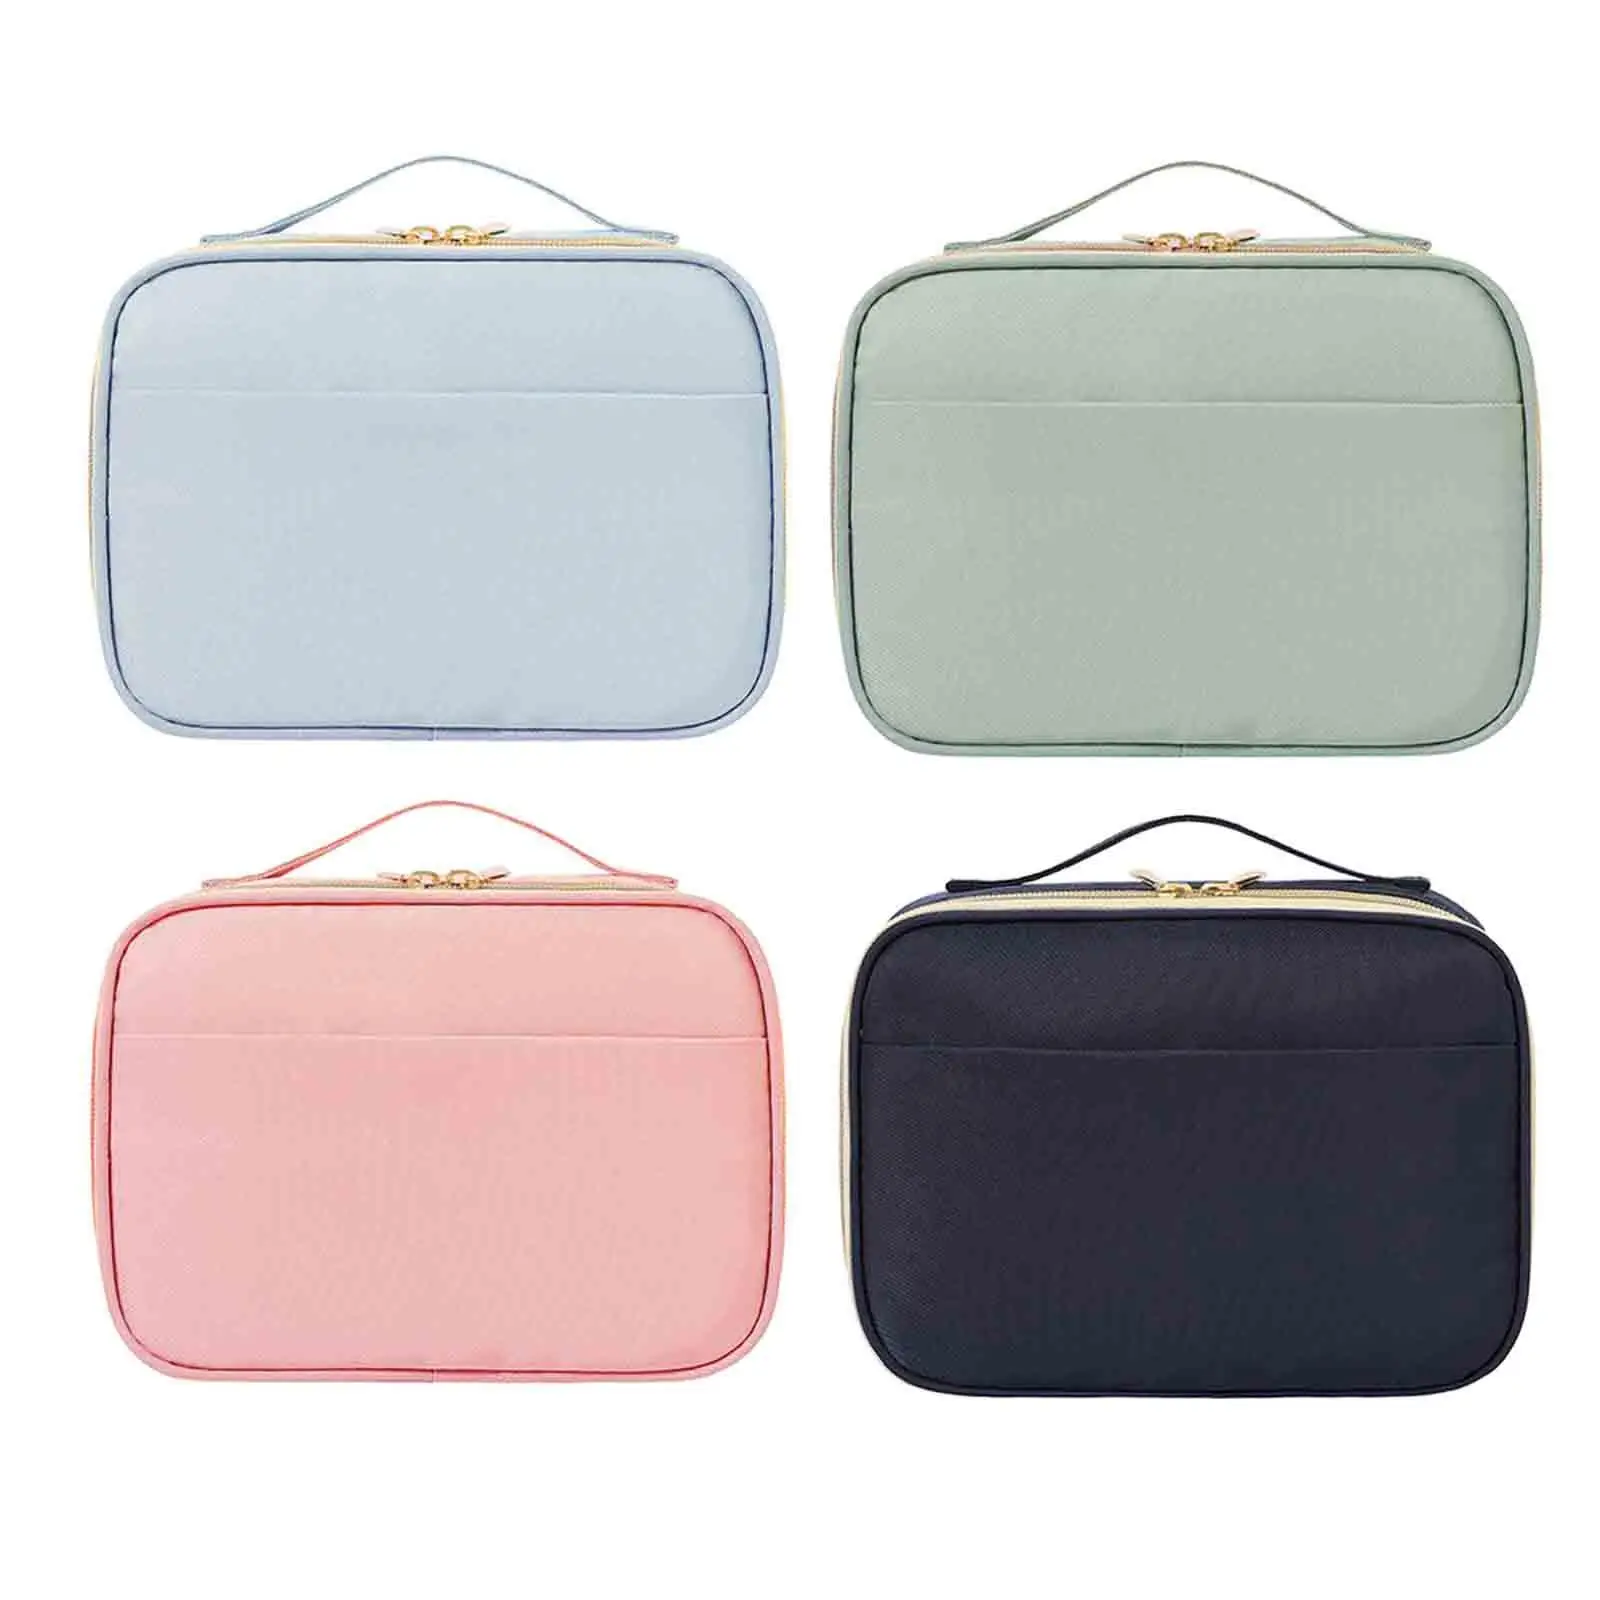 2 in 1 Makeup Bag Home Use Zipper Pouch Foldable Shower Organizer Kit Travel Toiletry Bag for Bathroom Toiletries Traveling